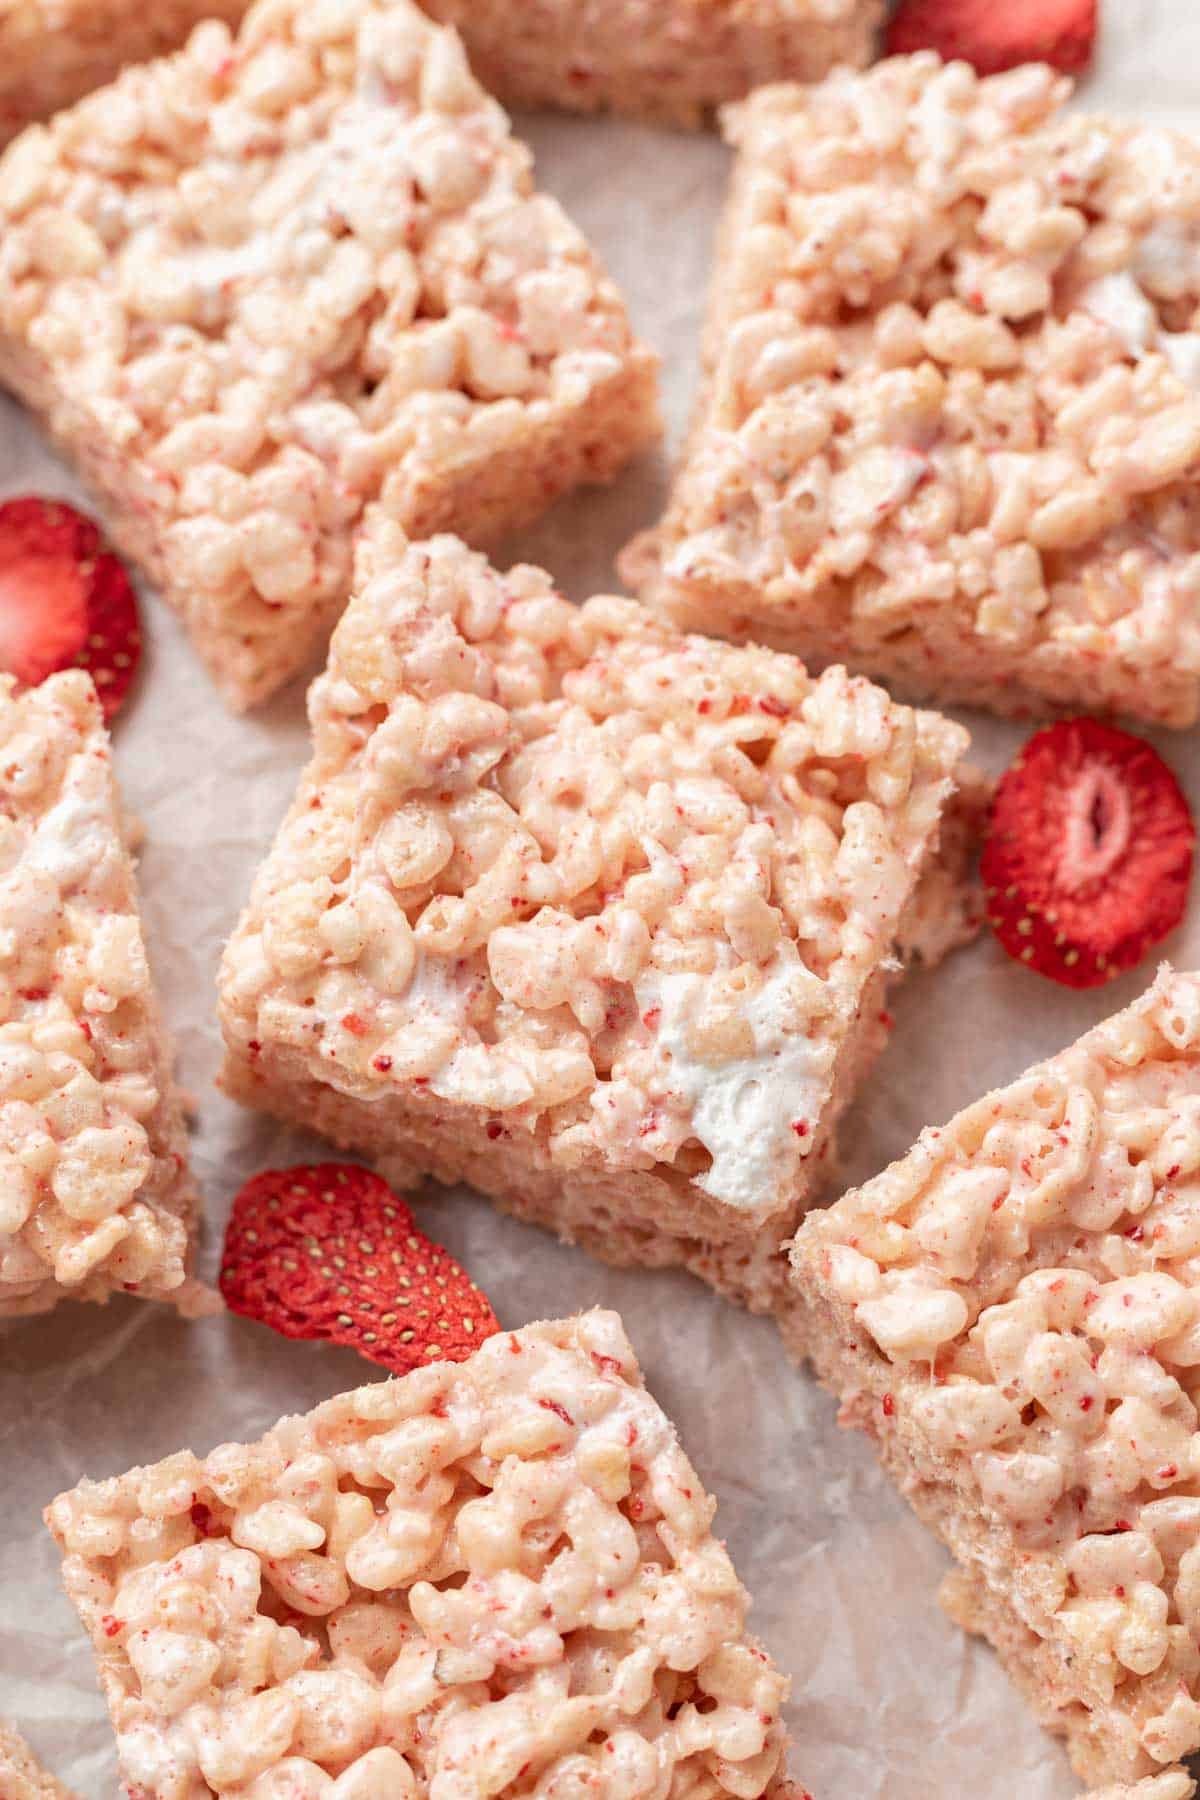 freshly made strawberry rice krispie treats sitting on parchment paper with freezer dried strawberries.